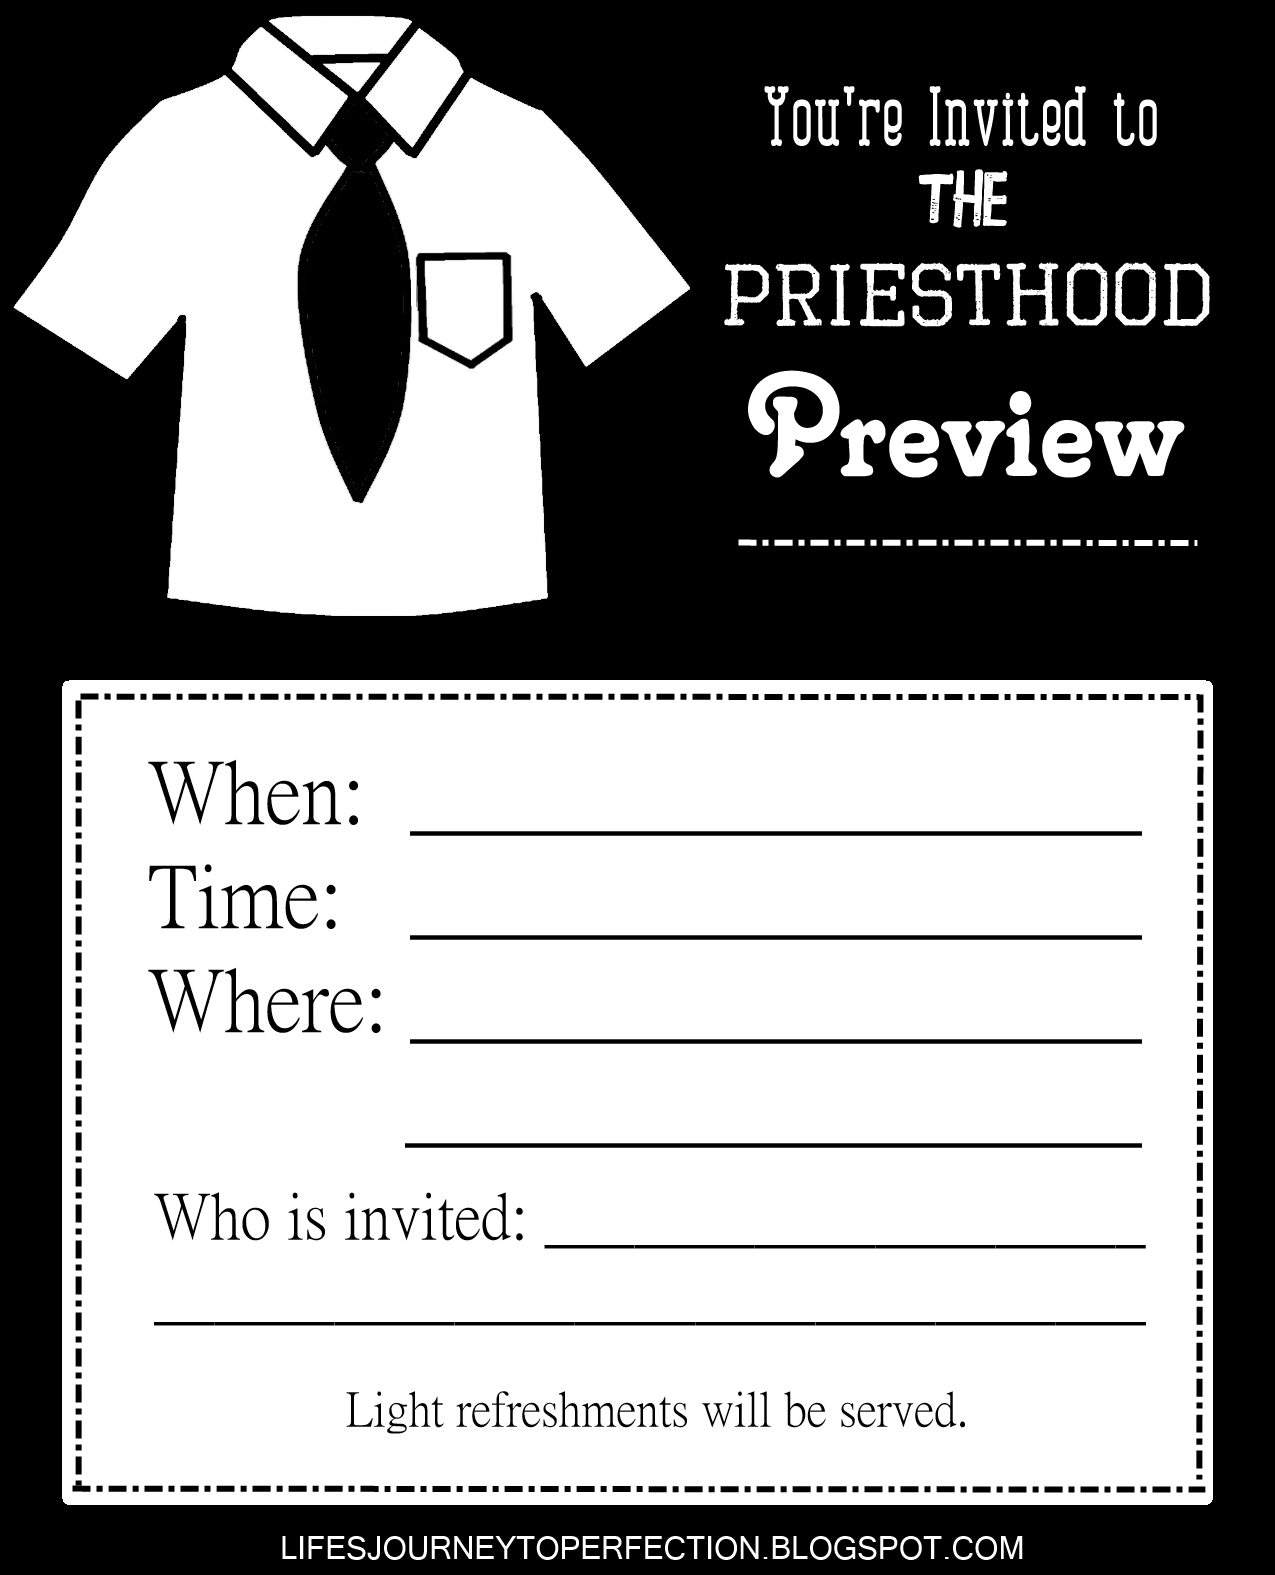 life-s-journey-to-perfection-lds-priesthood-preview-ideas-and-printables